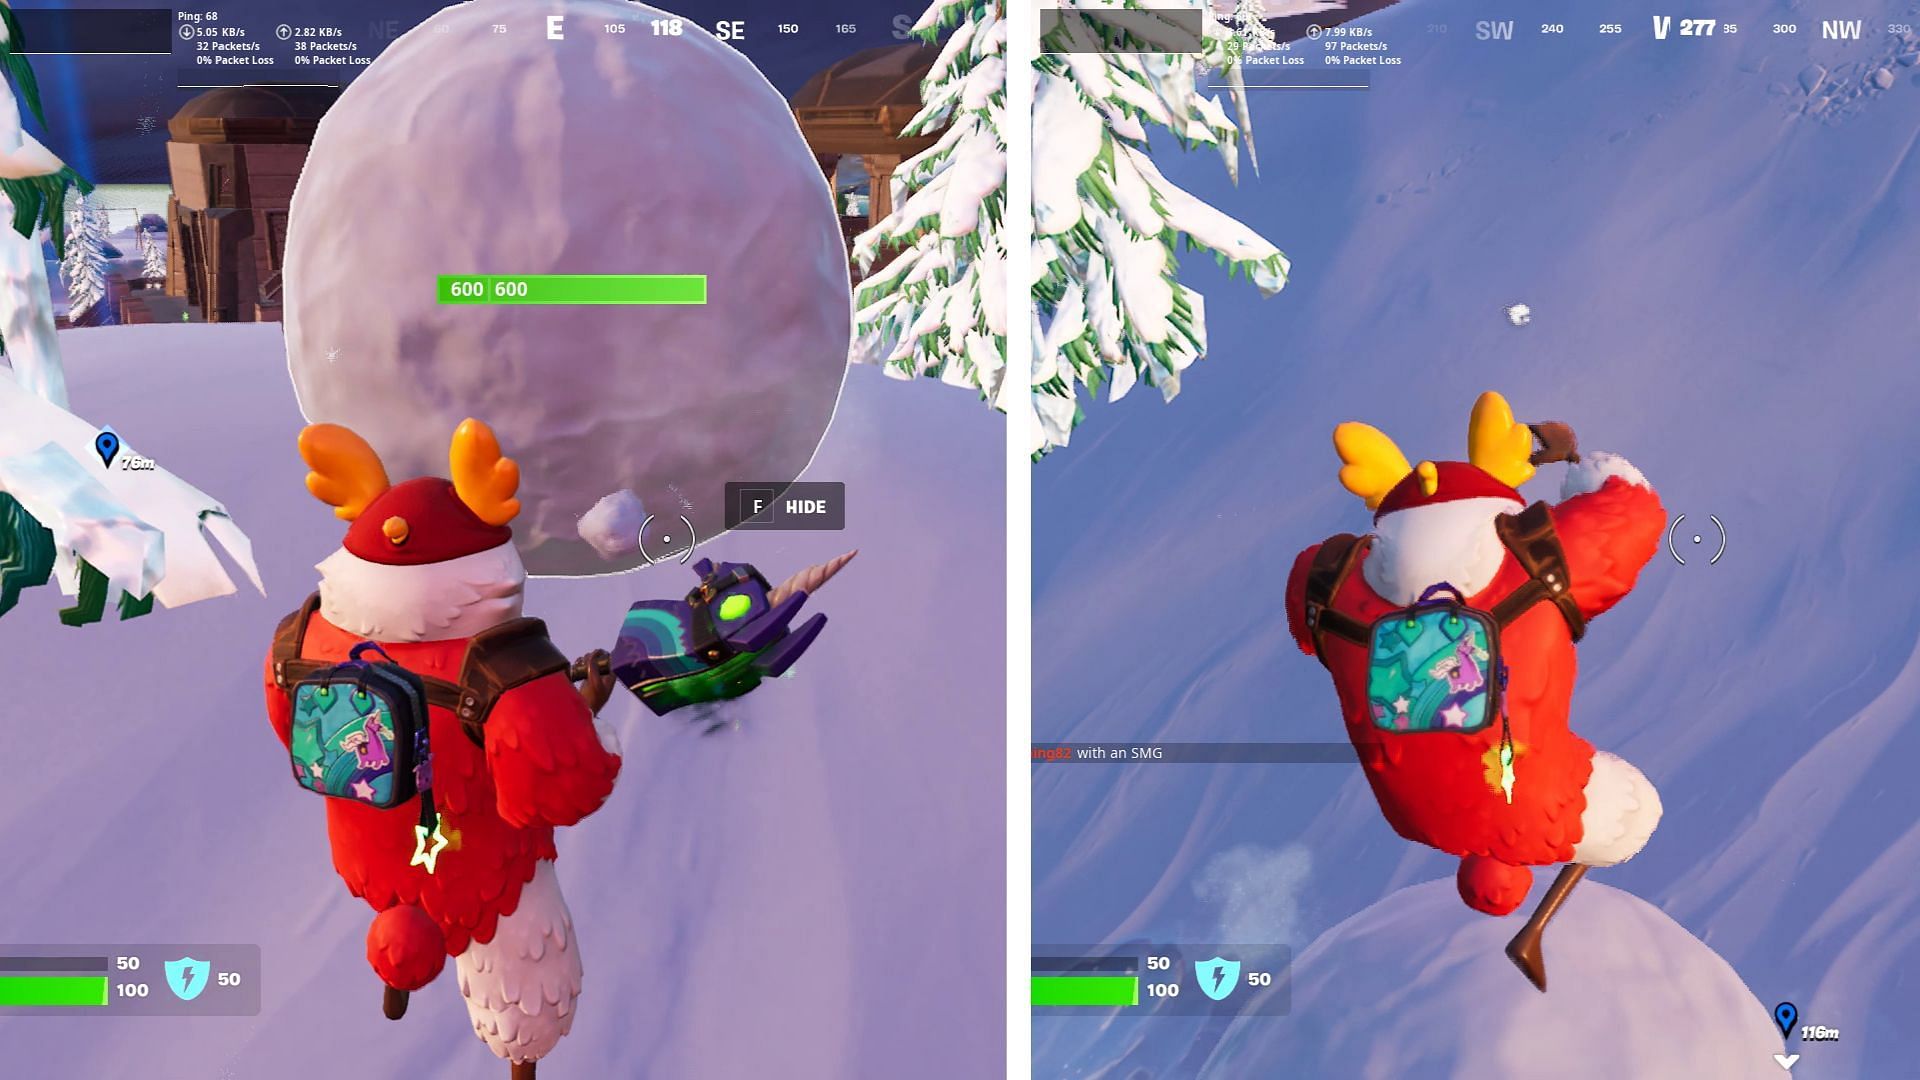 Press F to hide or unhide in a Giant Snowball (Image via Sportskeeda)